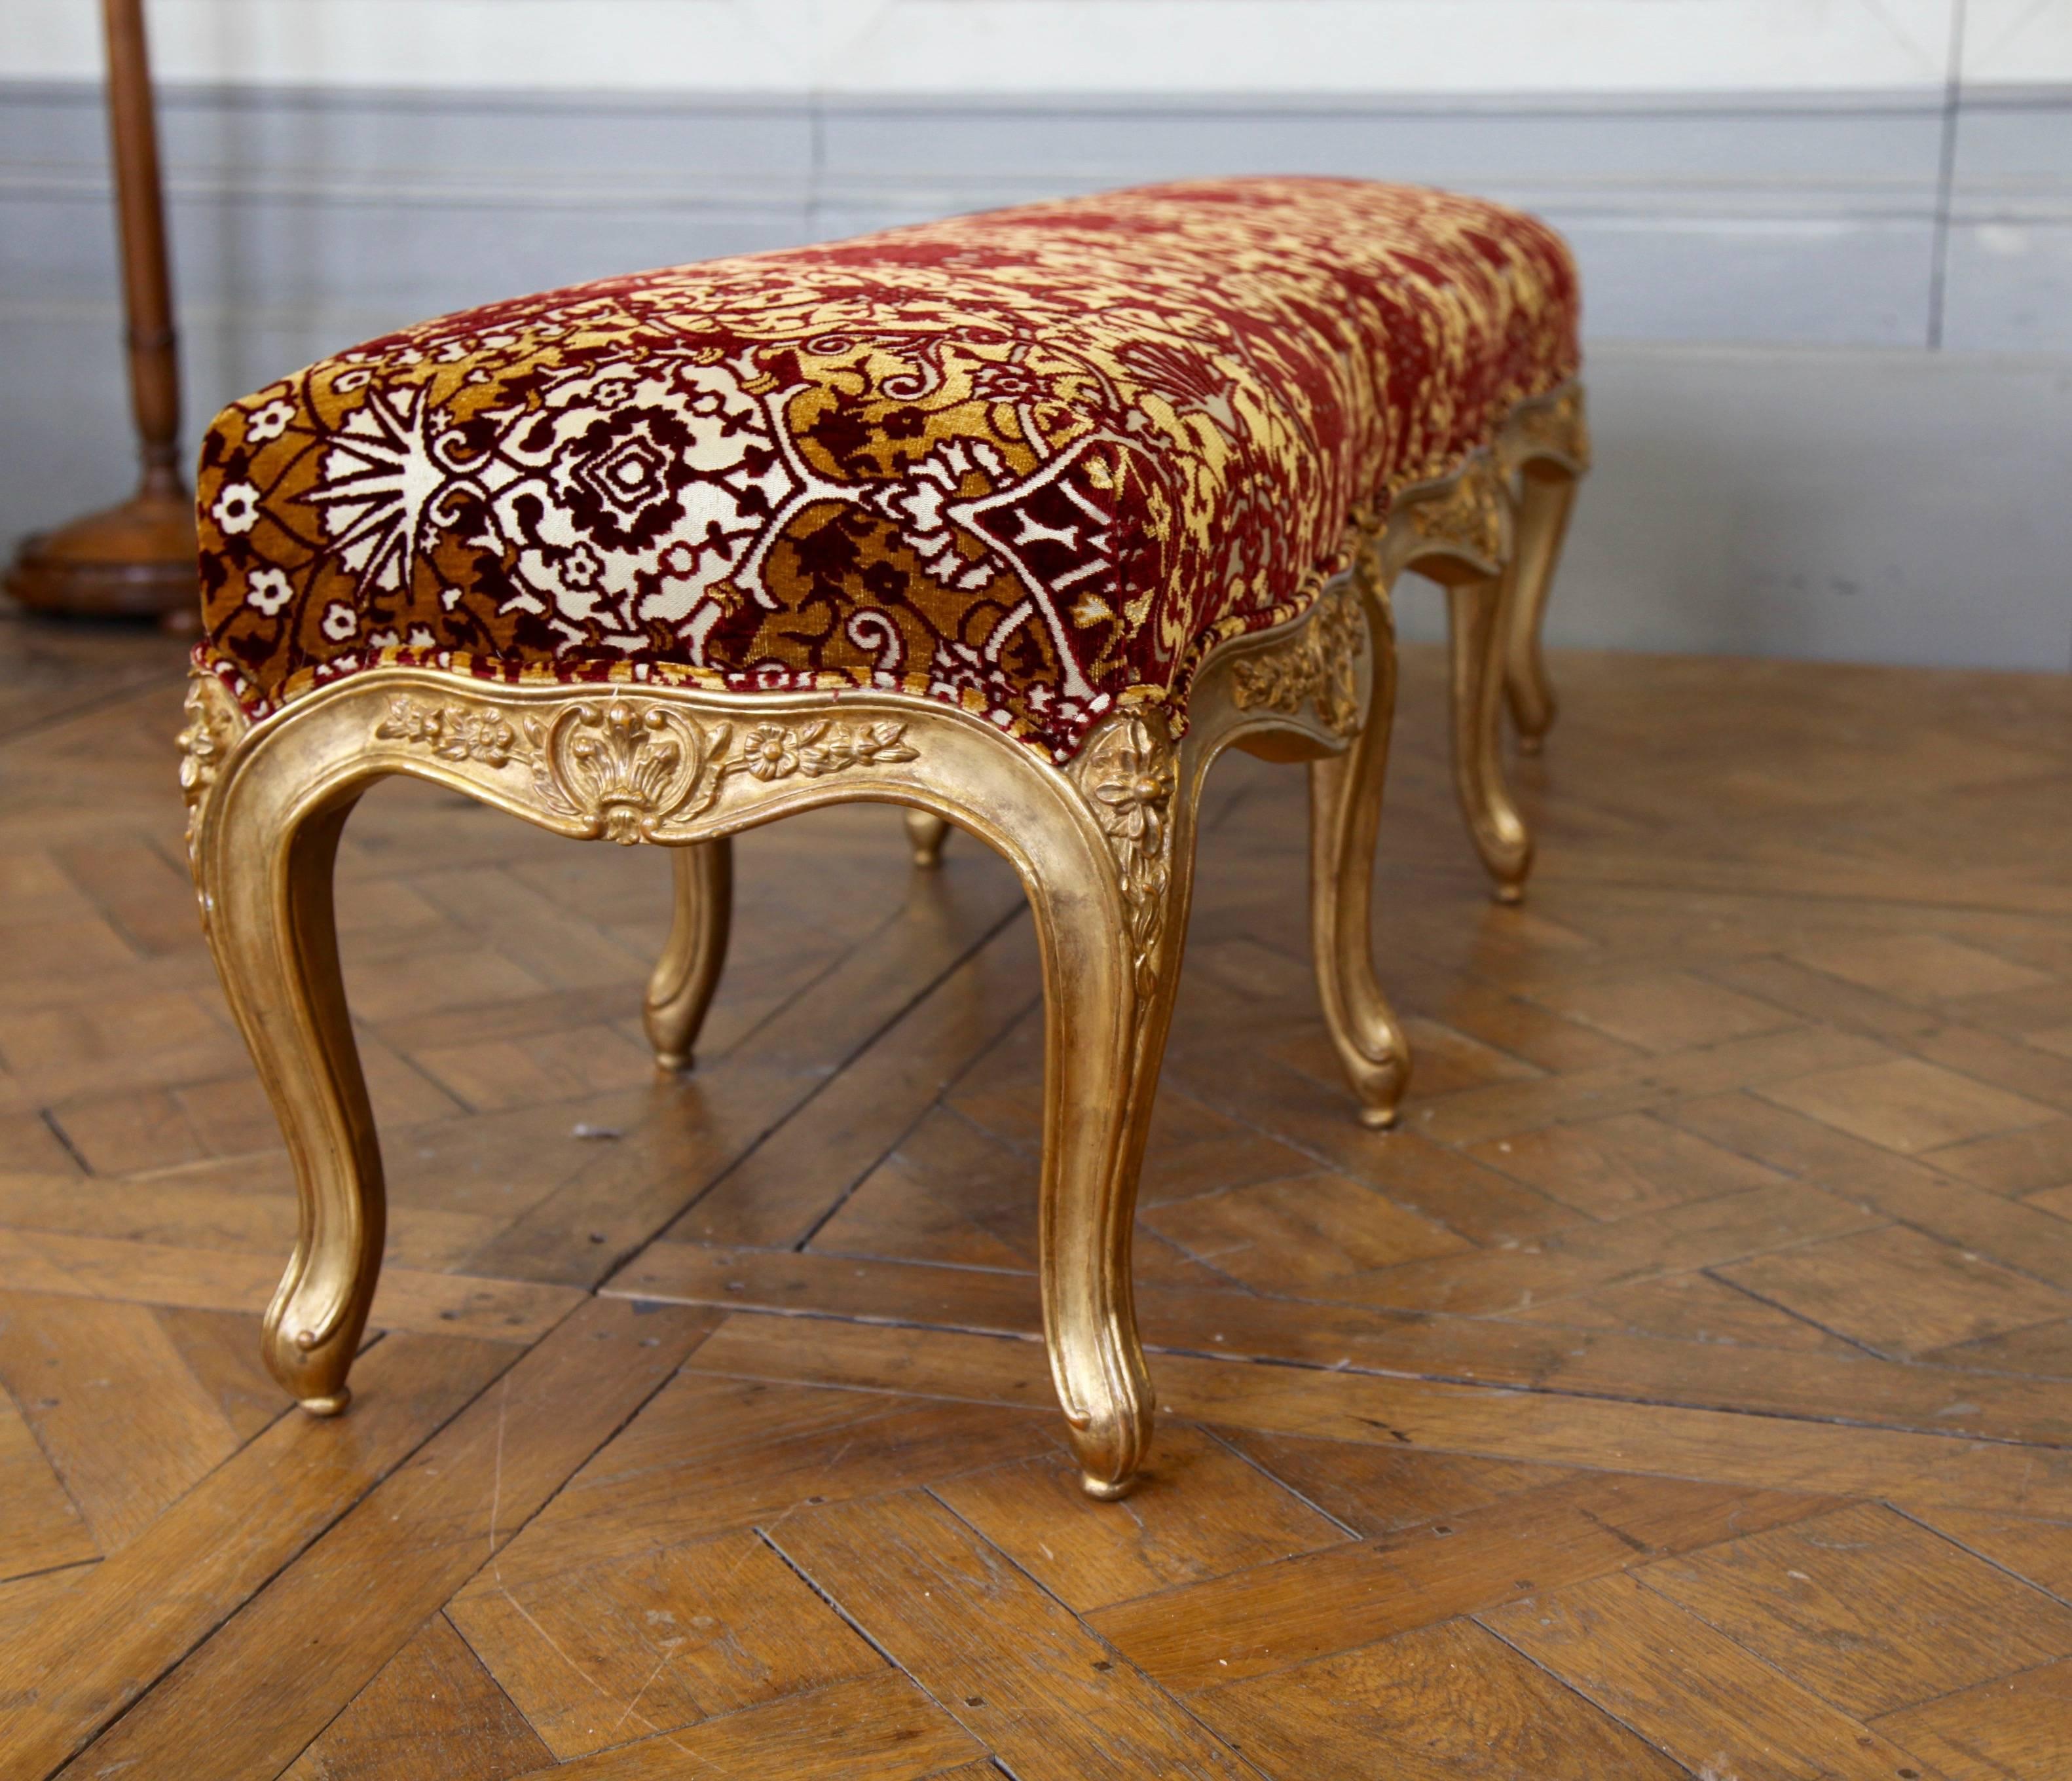 Louis XV style bench: Hand-carved by master craftsmen and hand finished in an antique gilded patina using traditional methods and materials. Upholstered in red and gold fabric as seen in the picture.